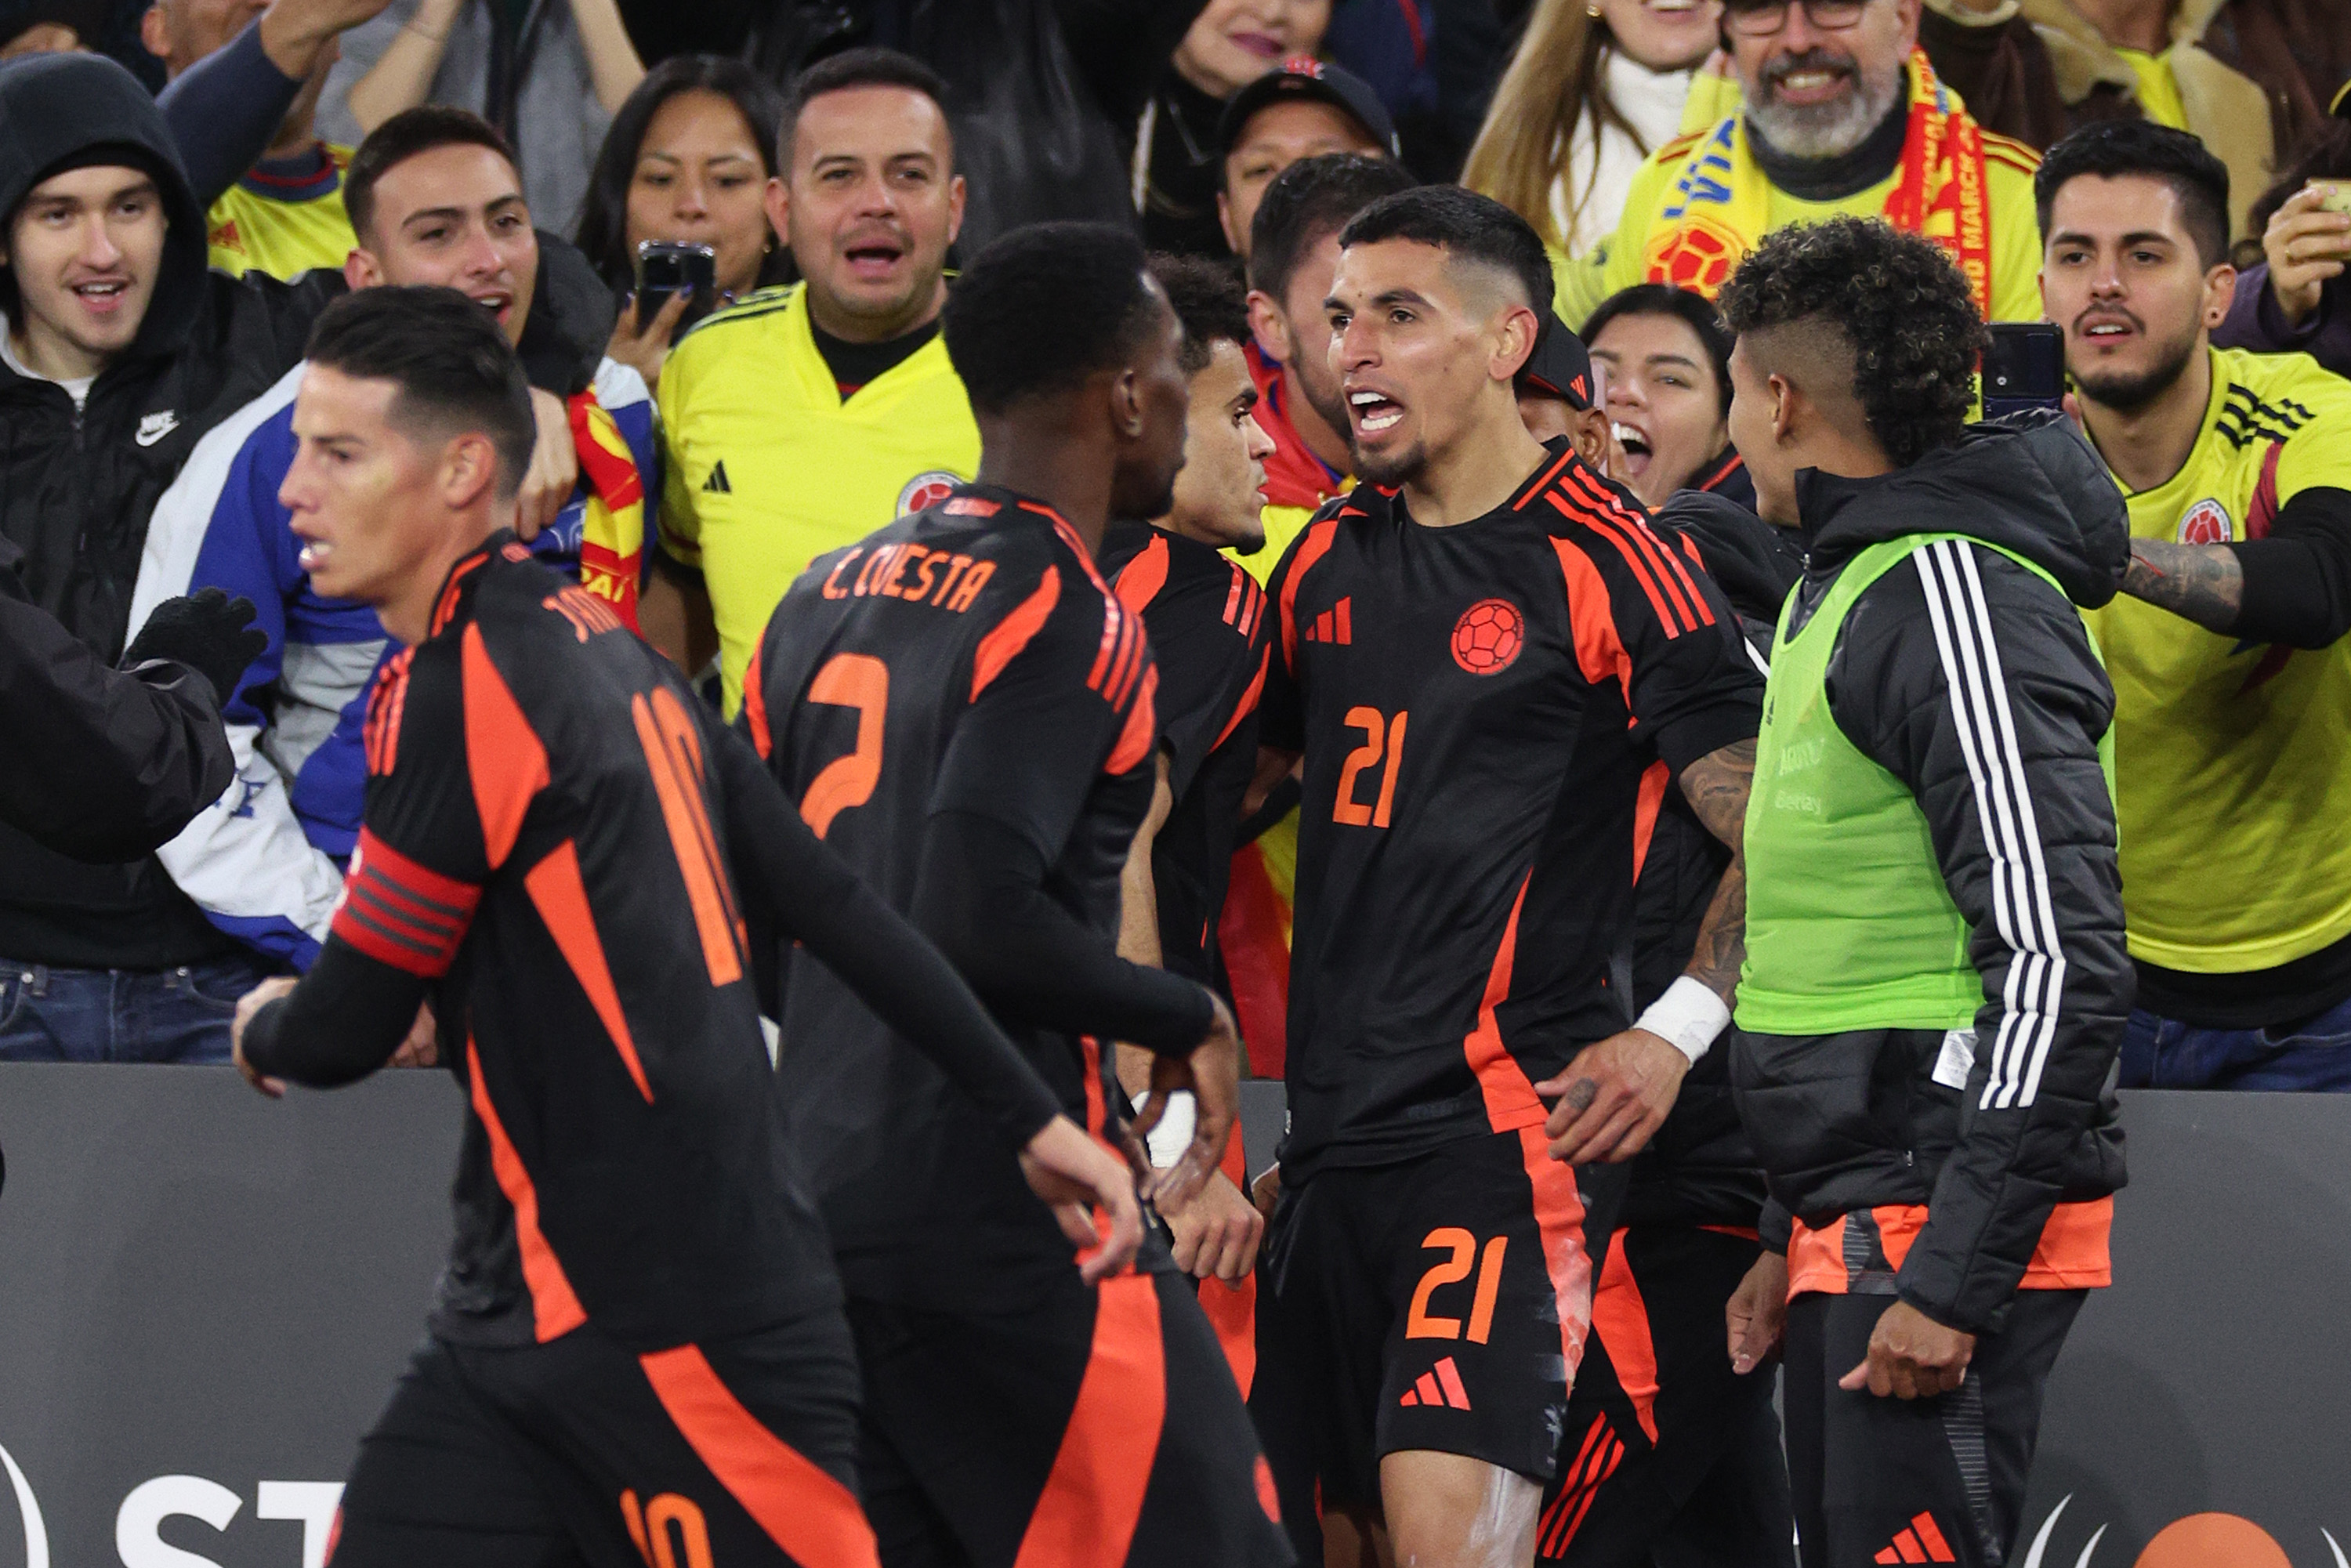 Colombia extend unbeaten run to over two years after beating Spain.